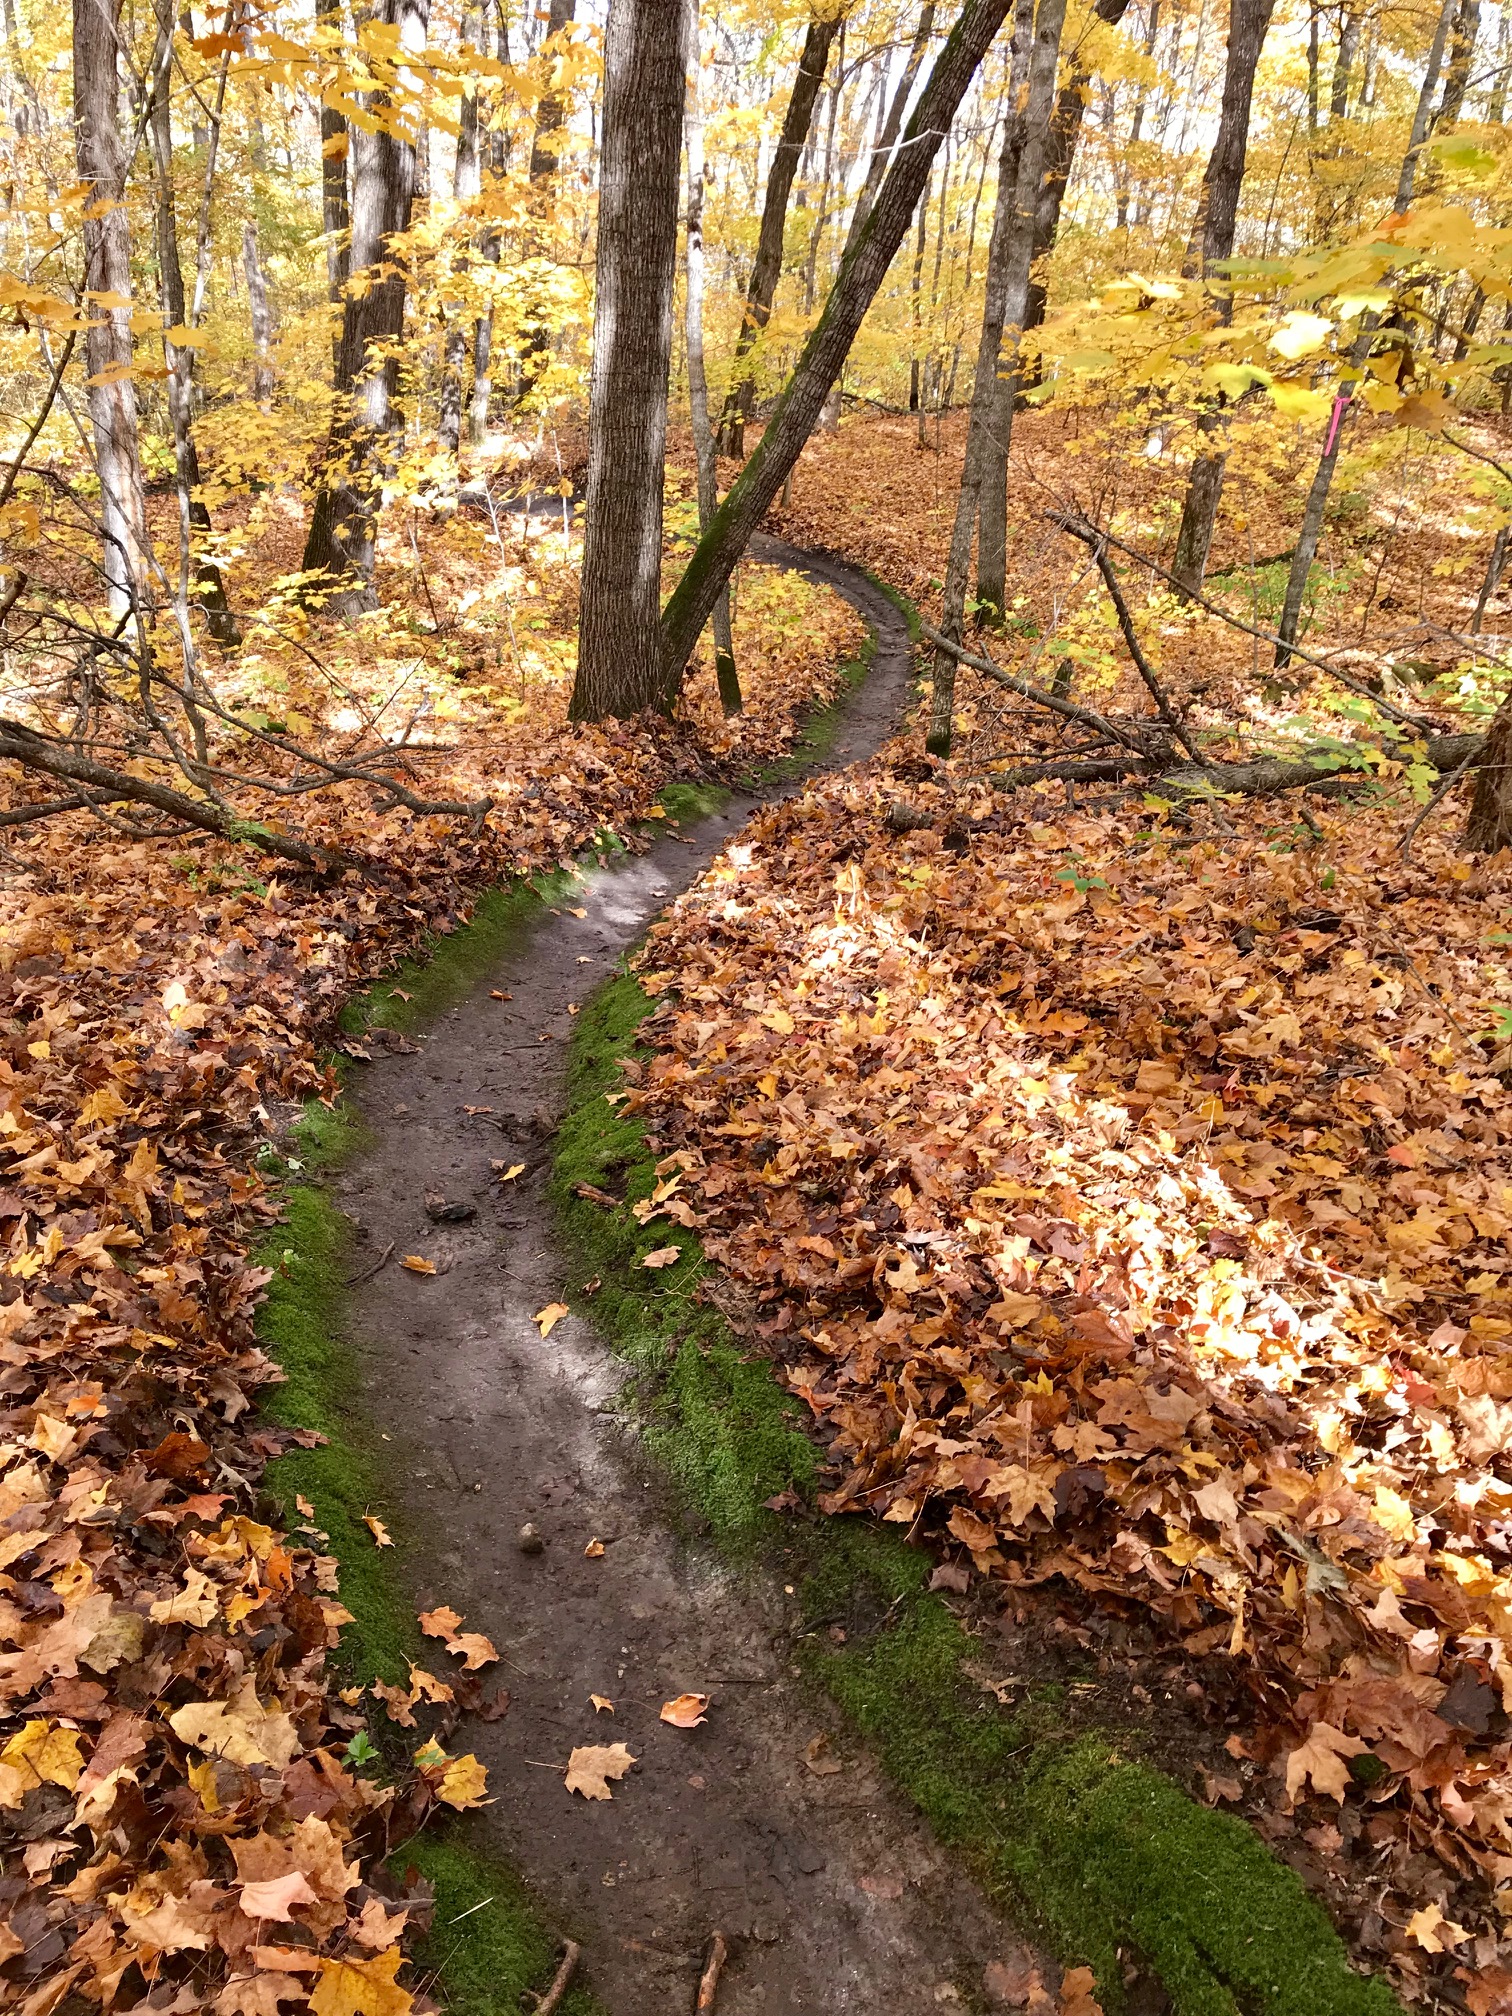 Section of Twin Lakes singletrack after leaf blowing, October 6th, 2017.